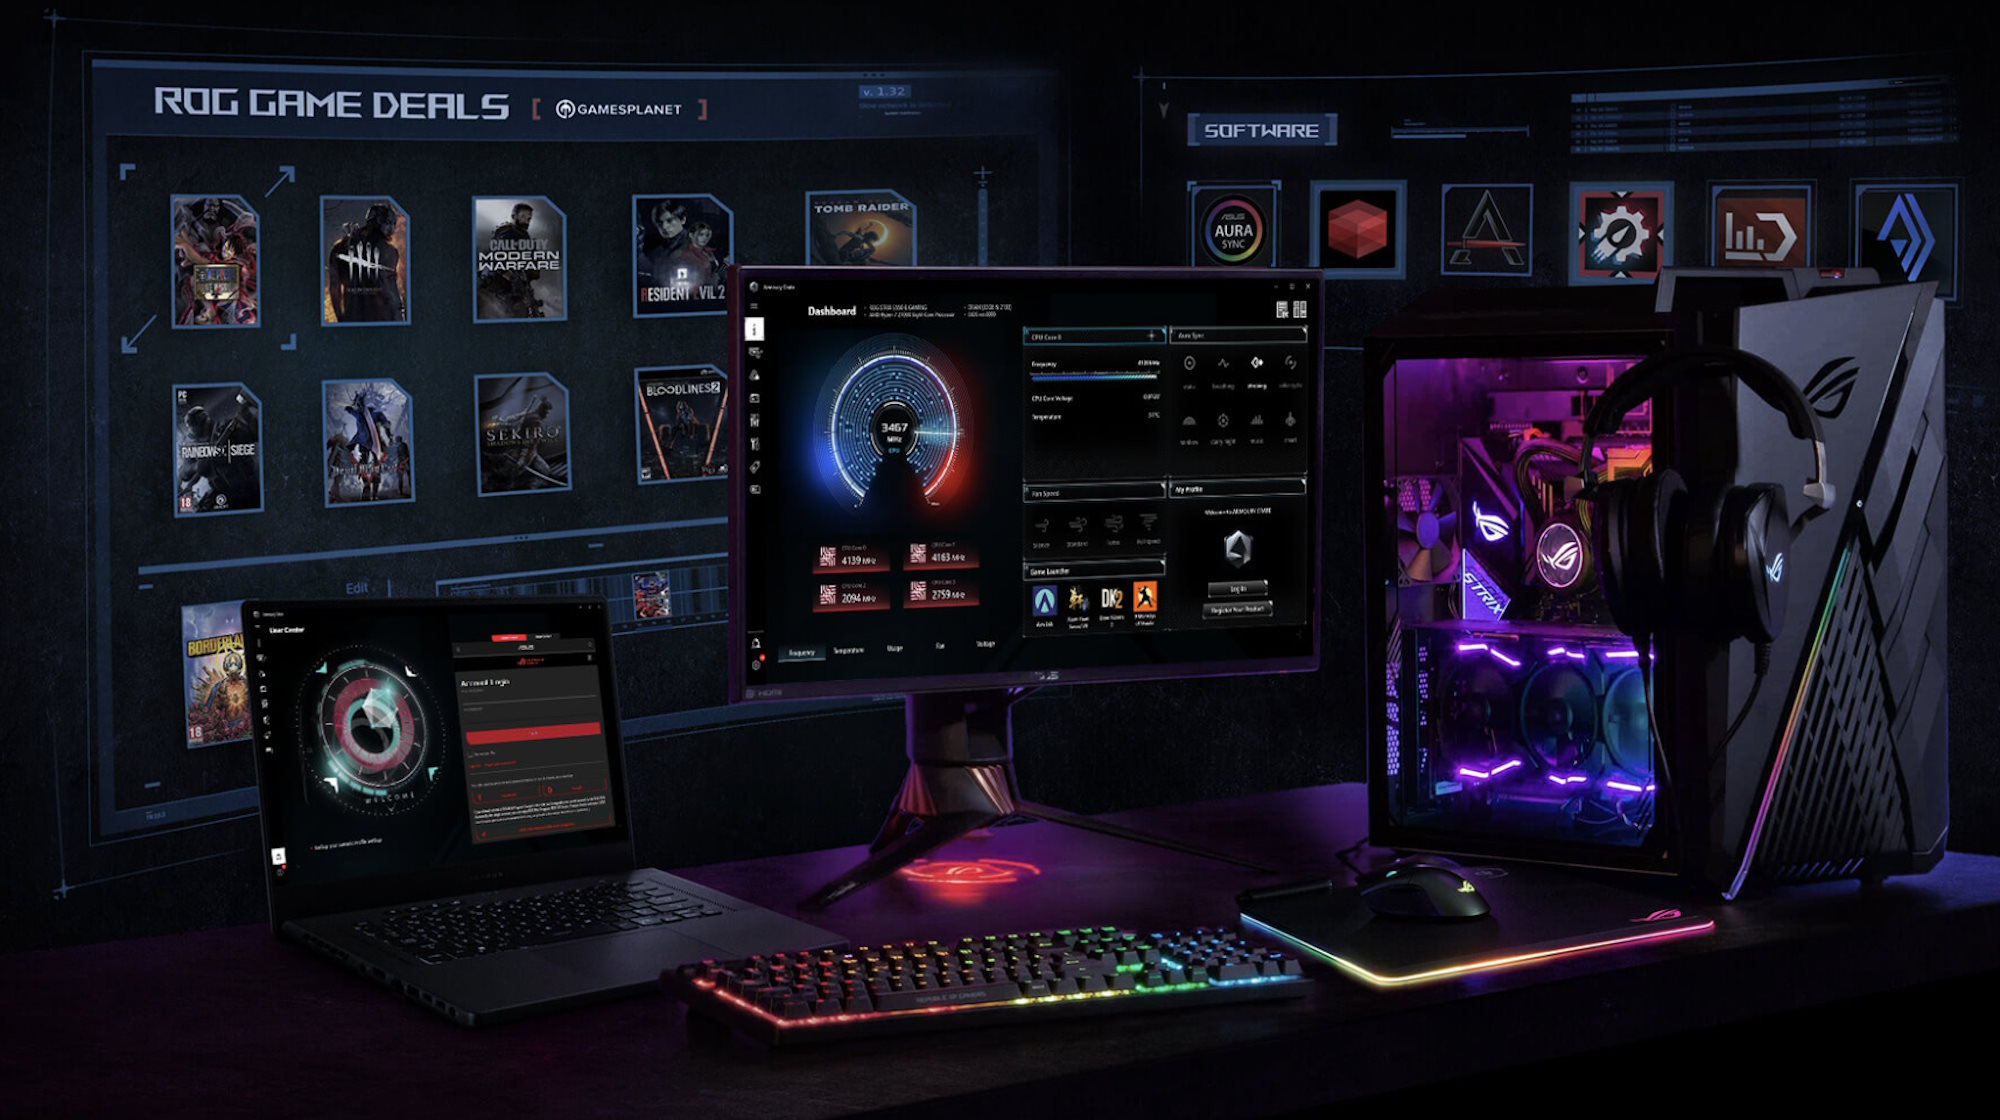 A full gaming PC setup with the Armour Crate app visible on the monitor